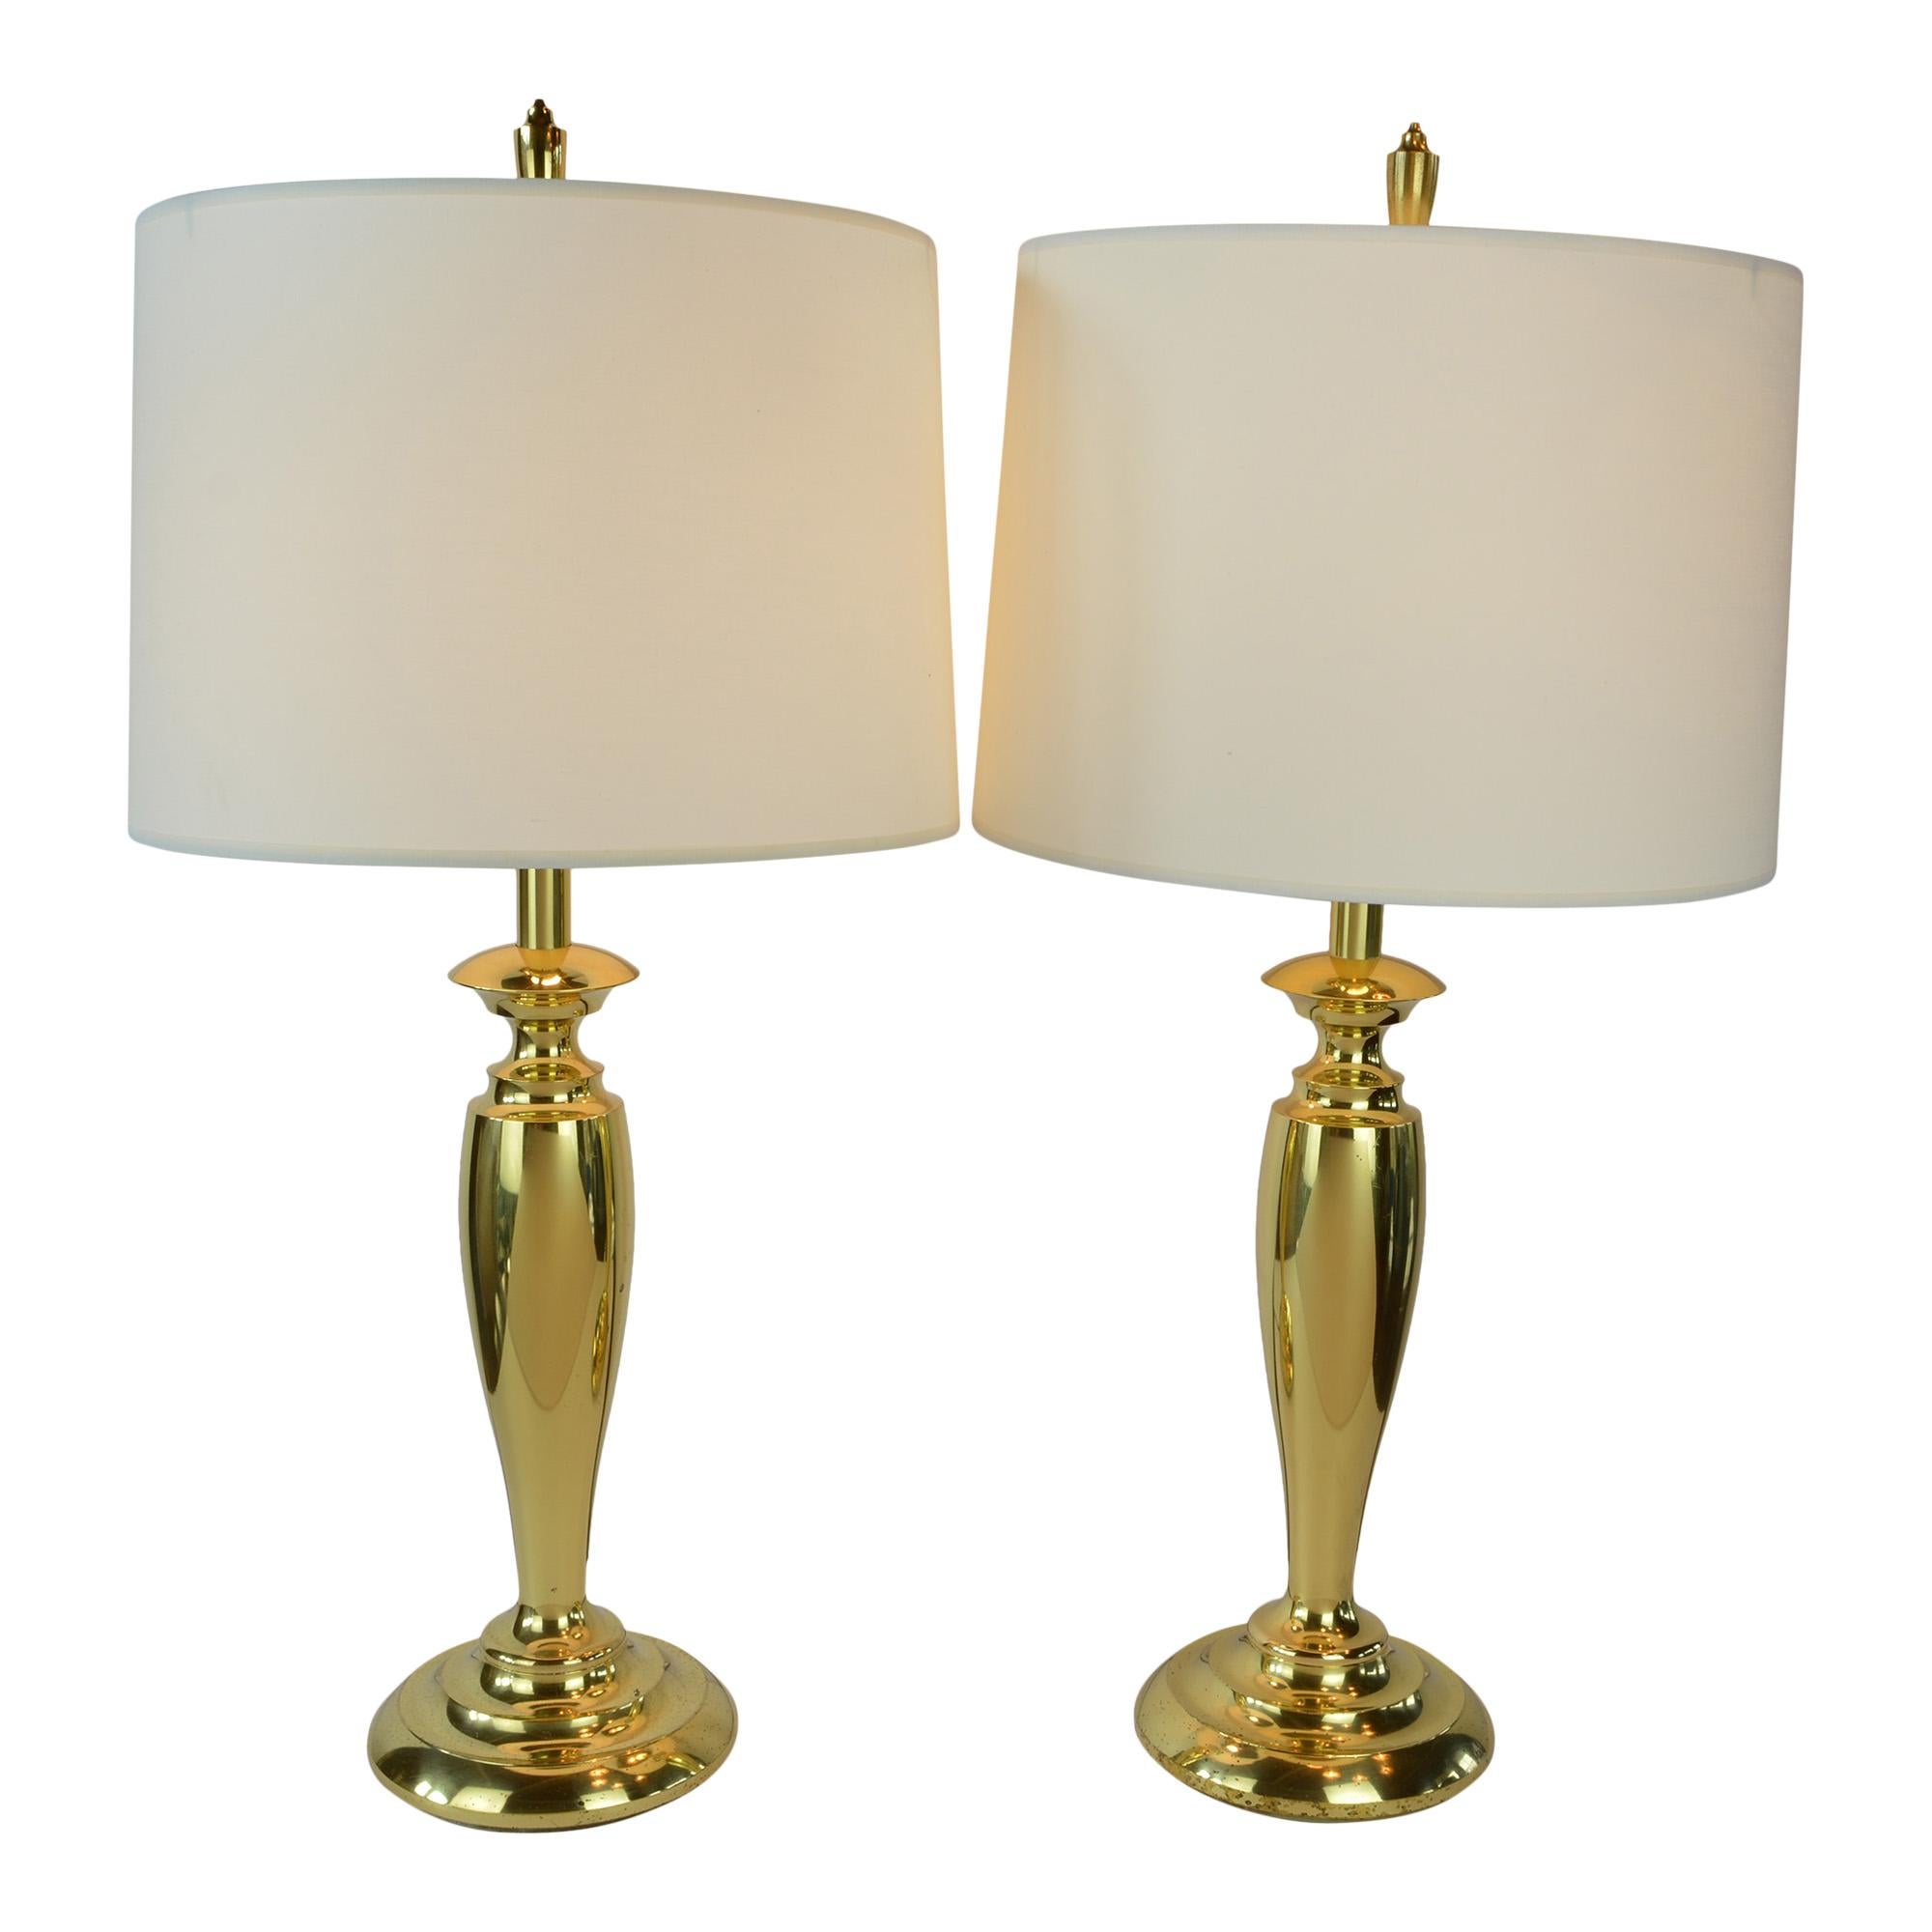 Pair of Brass Stiffel Mid-Century Modern Table Lamps with Drum Shades In Good Condition For Sale In Pataskala, OH